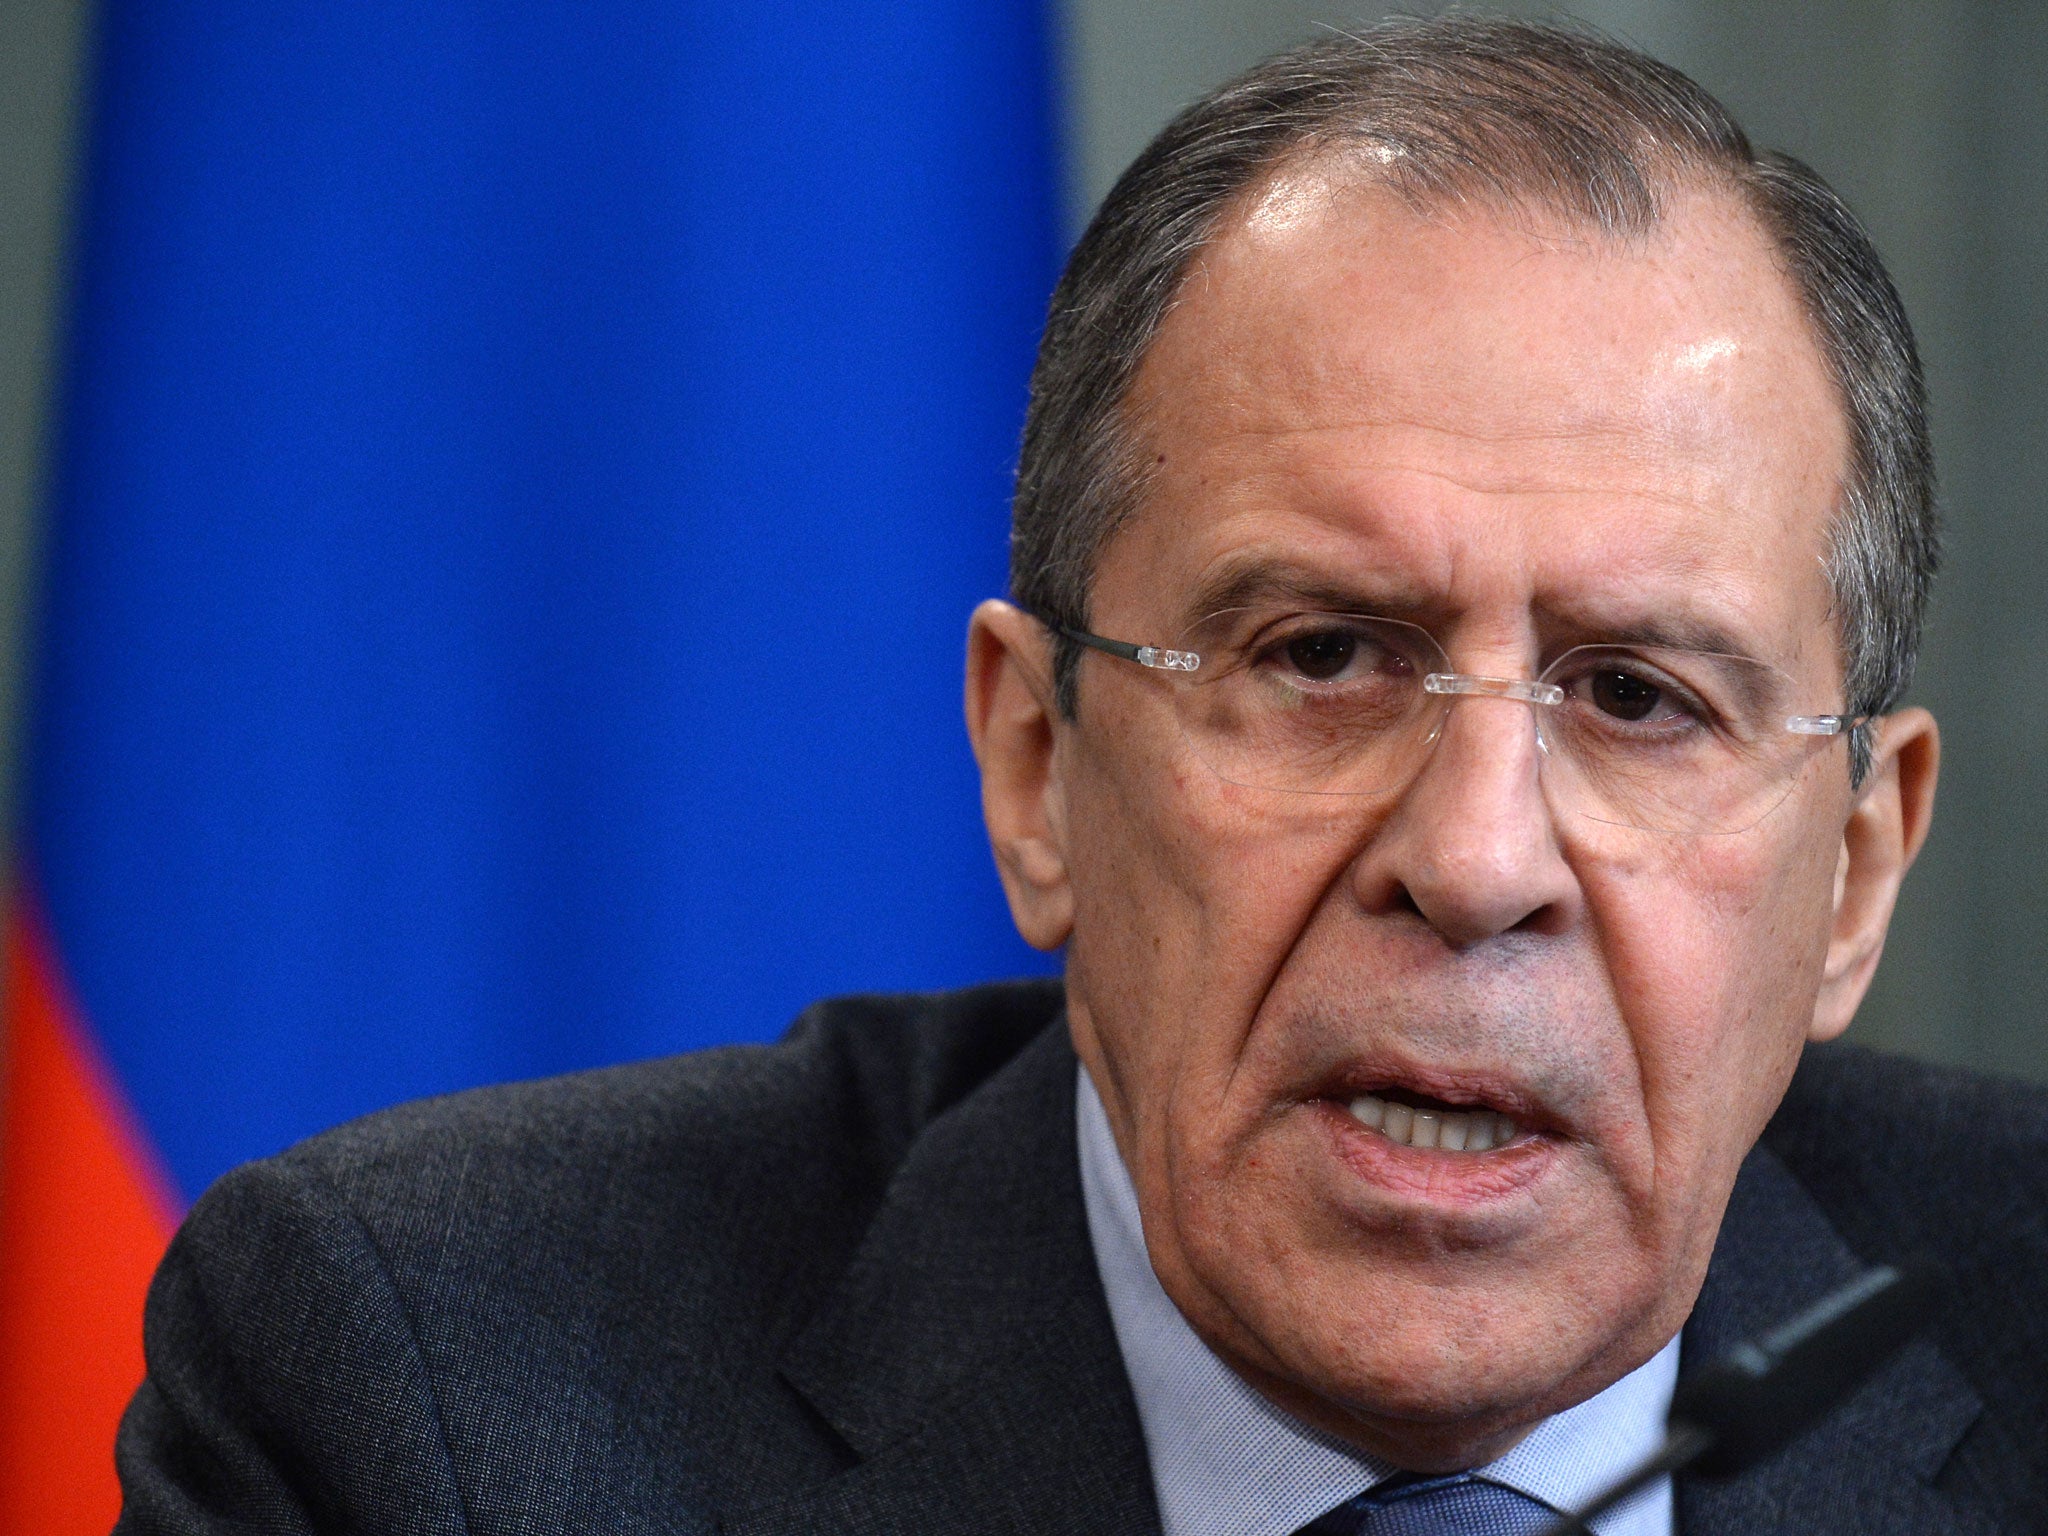 Russian Foreign Minister Sergei Lavrov speaks during press conference in Moscow on 17 January 2014. He has since called the UN's withdrawal of its invitation to the Syrian peace talks to Iran "a mistake, but not a catastrophe".